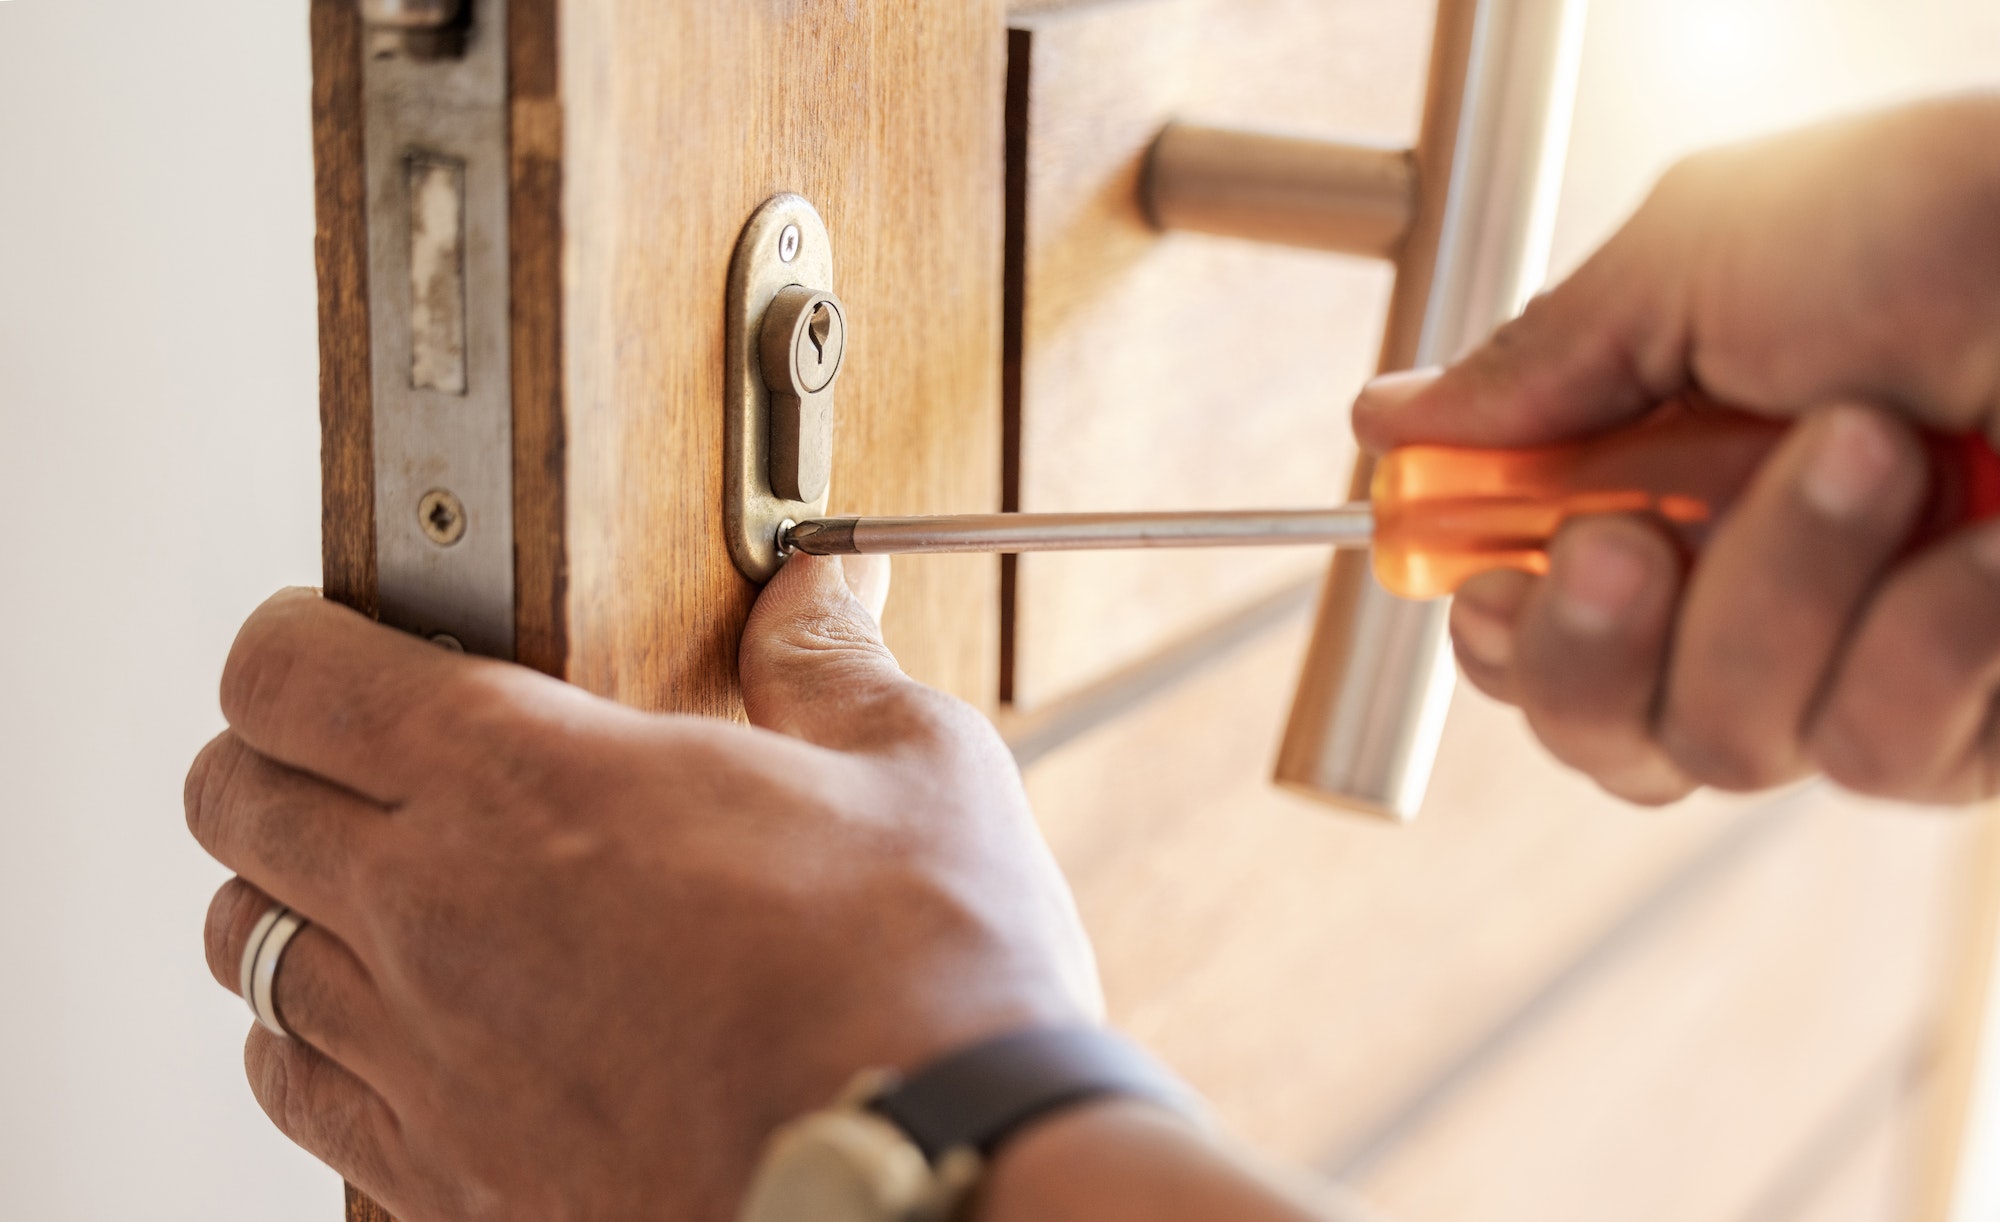 Locksmith hands, maintenance and handyman with tools, home renovation and fixing, change door locks